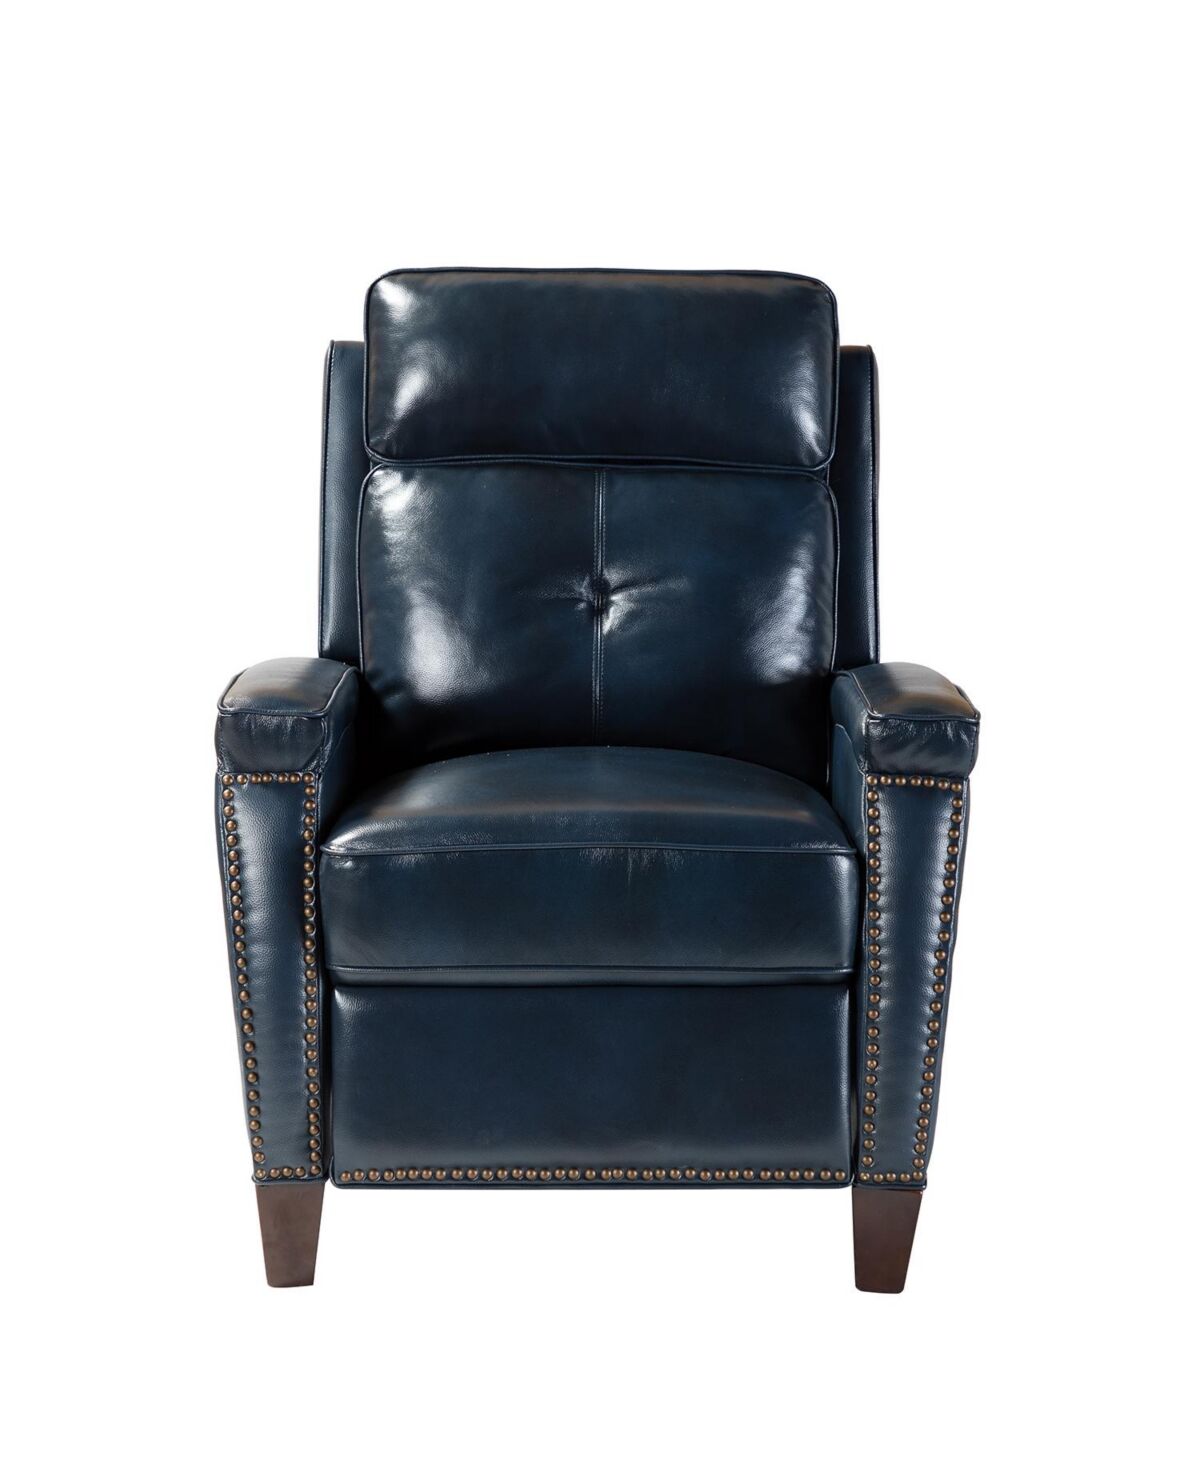 Hulala Home Sickel Genuine Leather Recliner Chair for Bedroom Living Room - Navy